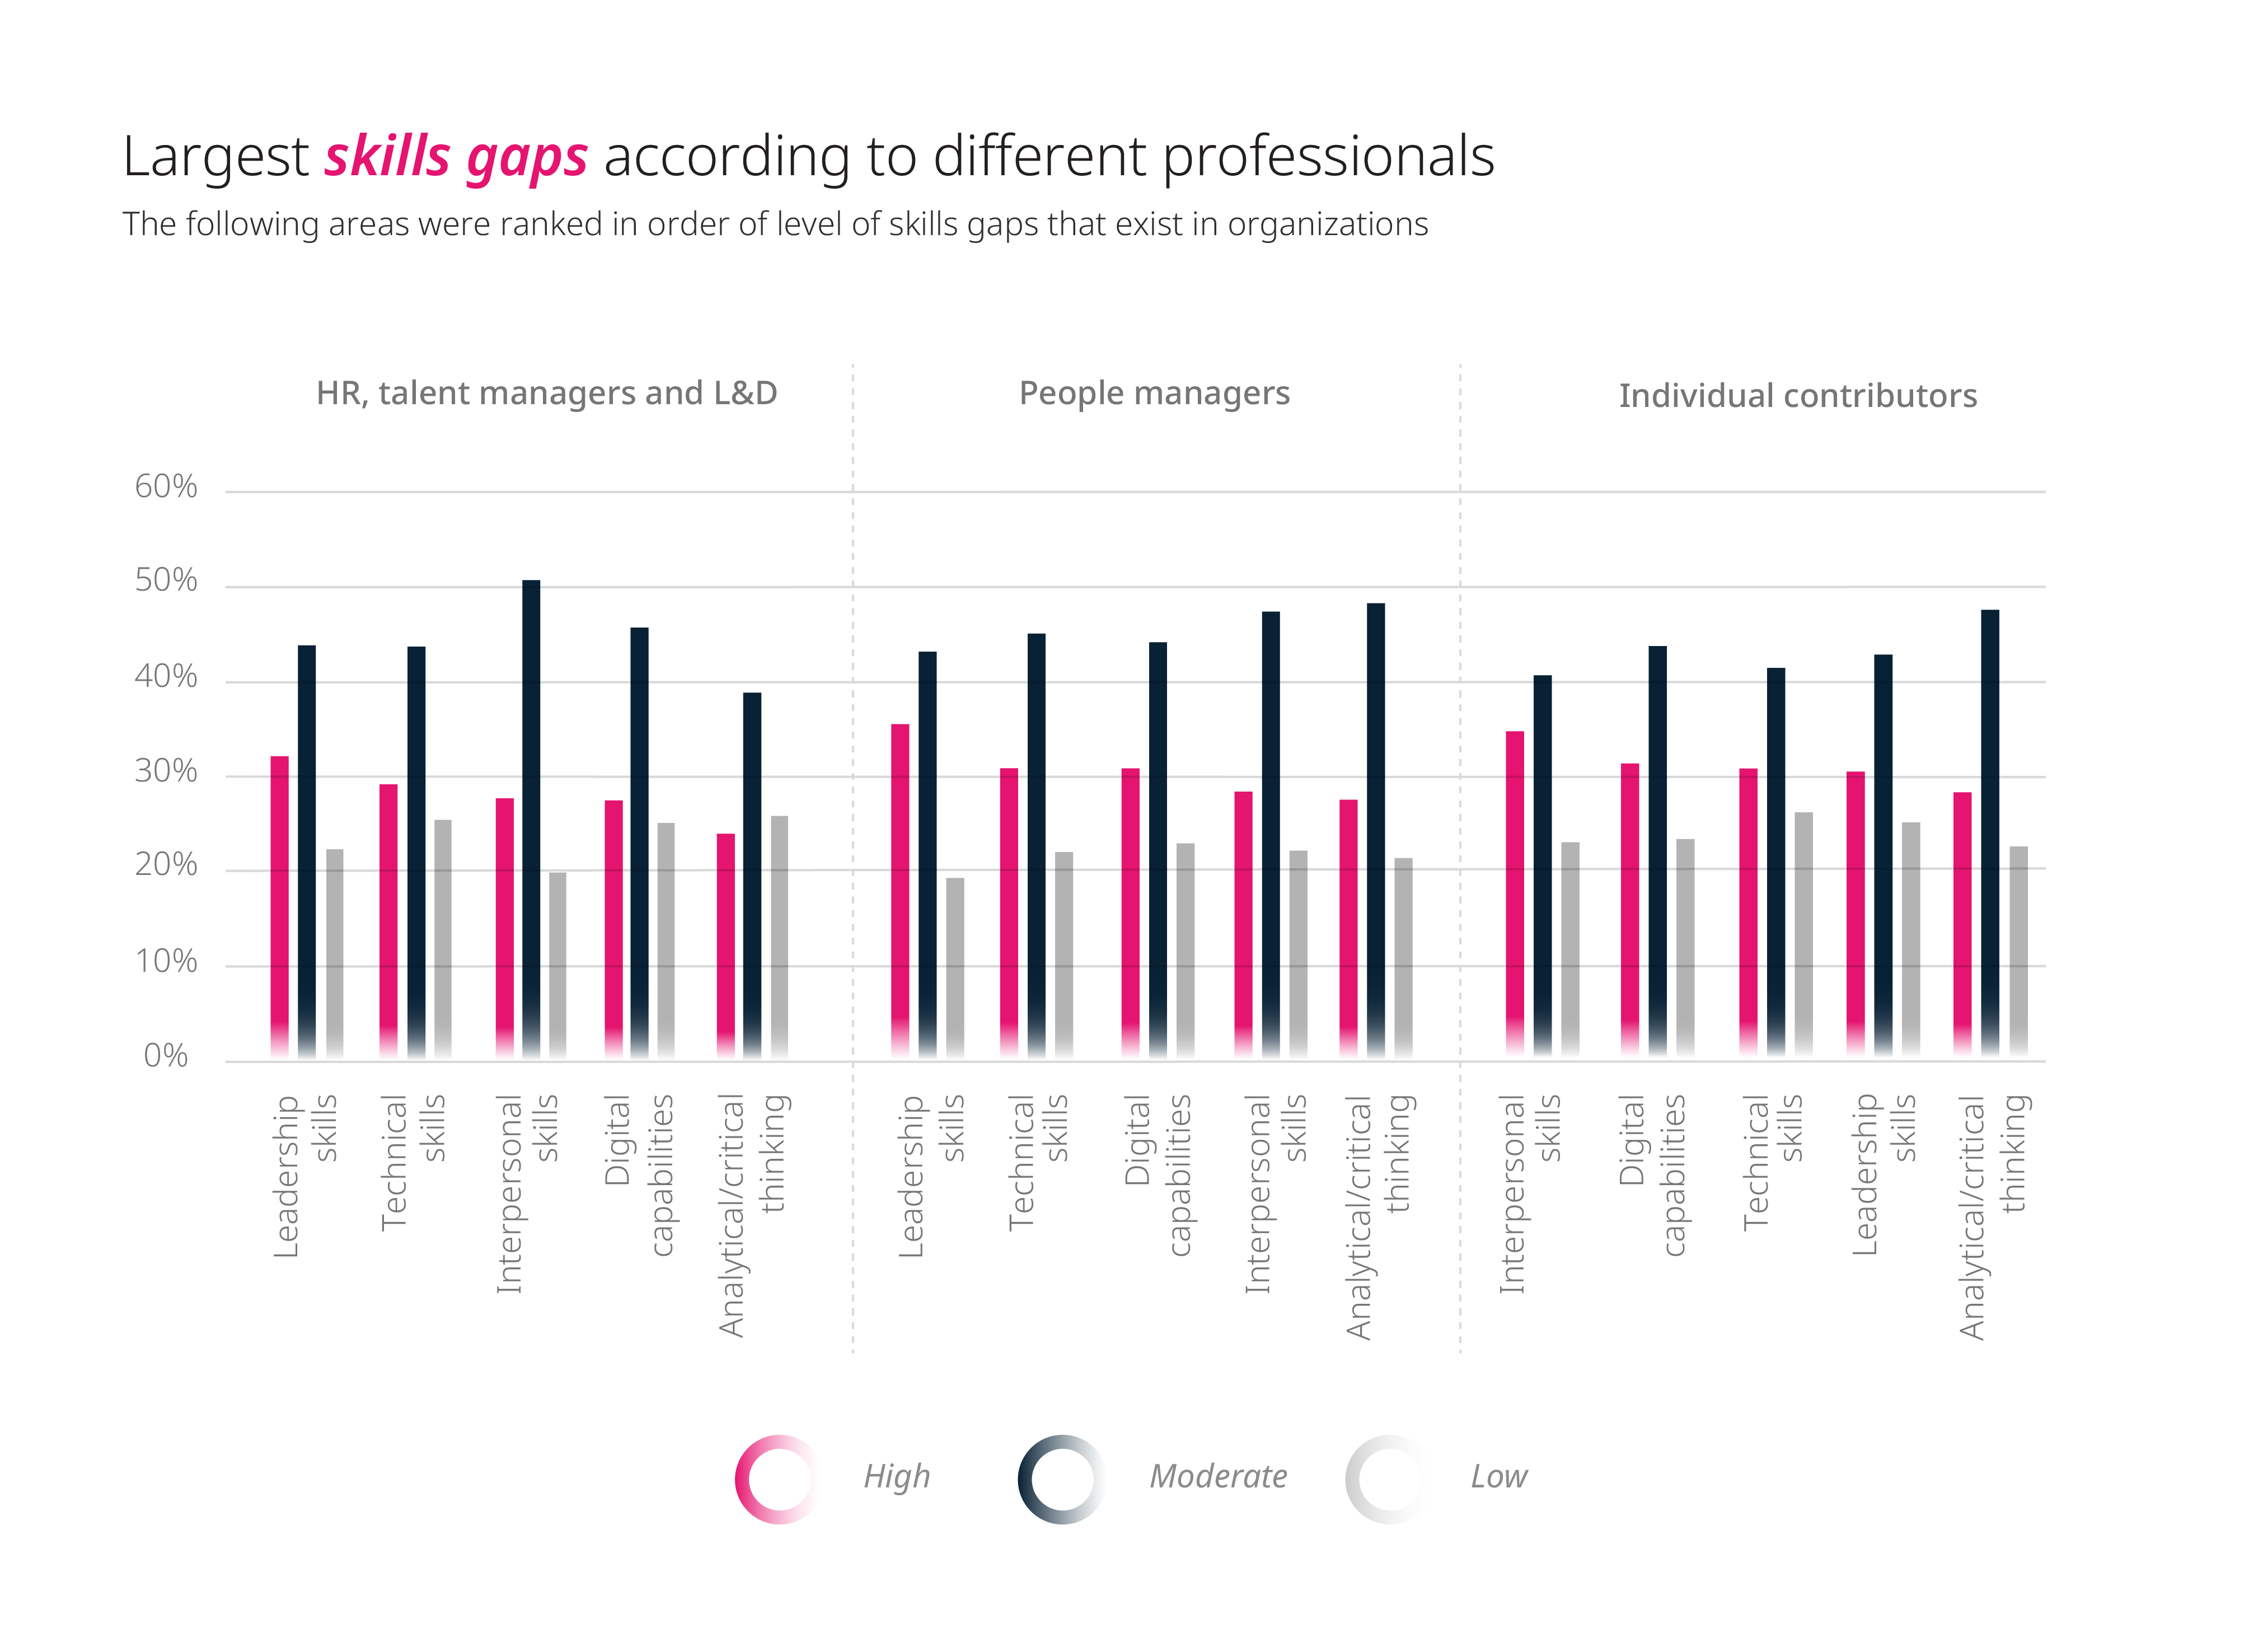 The largest skills gap according to different professionals